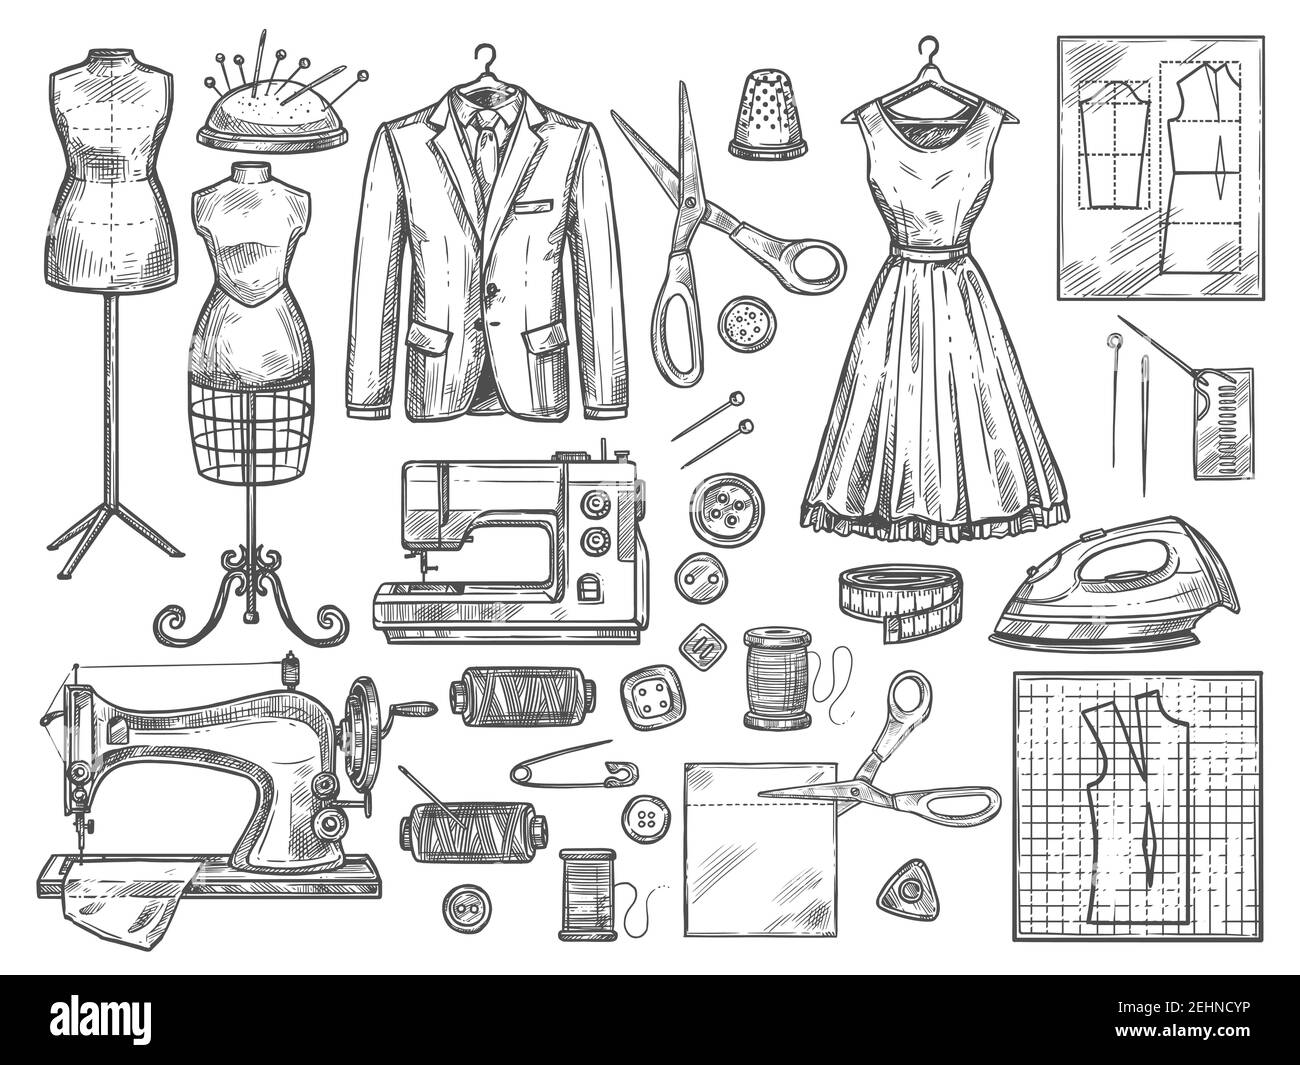 Tailor or dressmaker work and fashion designer atelier sketch items. Vector sewing machine or seamstress pattern cut and dress fitting dummy mannequin Stock Vector